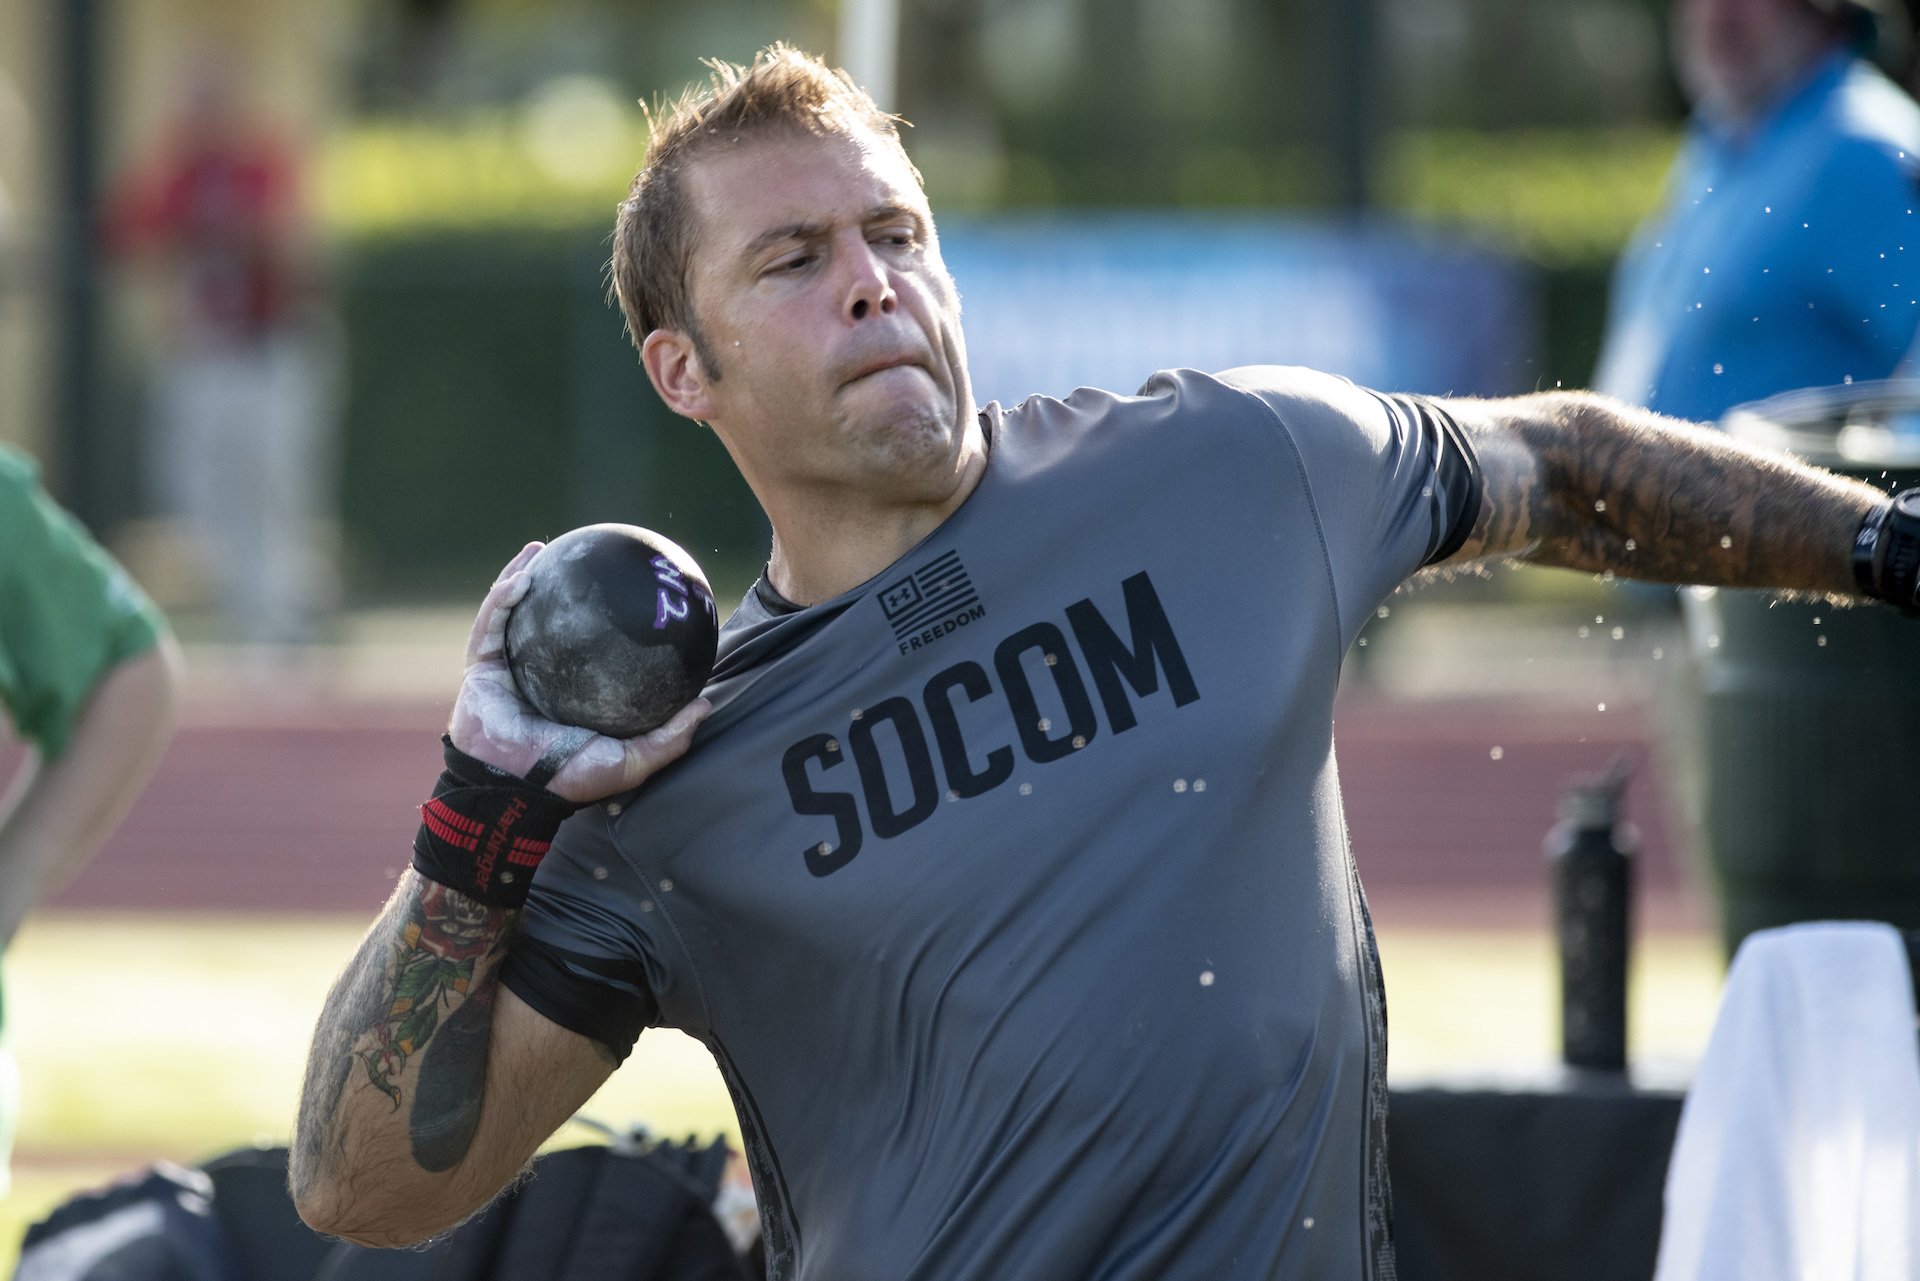 Team USSOCOM’s Jerry Millan competes in the shot put at the 2022 DoD Warrior Games, on Aug. 24, 2022 in Orlando, Florida. DoD Photo by Roger L. Wollenberg.